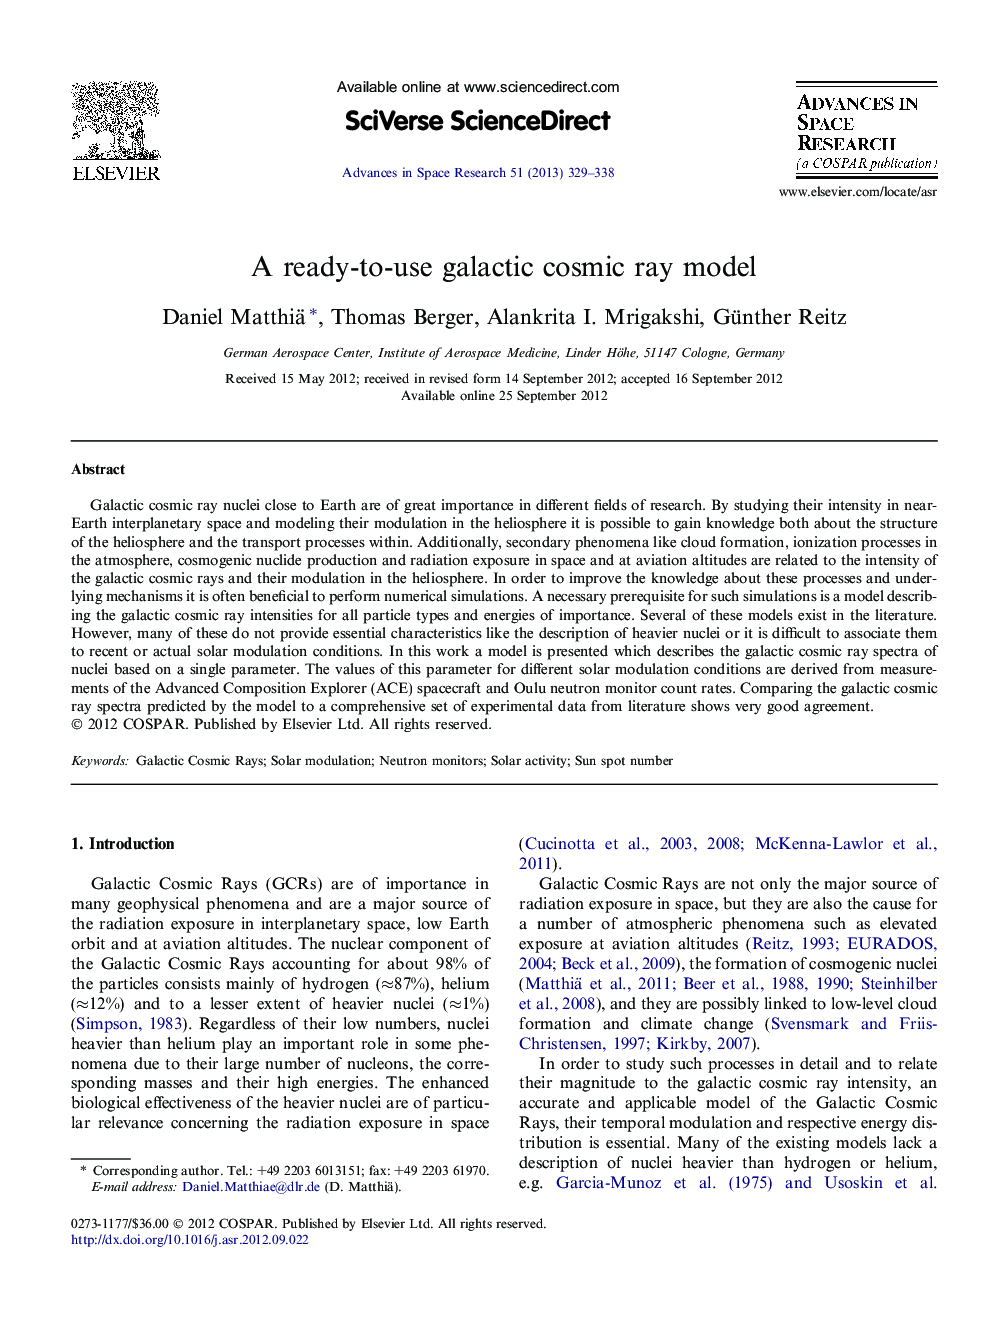 A ready-to-use galactic cosmic ray model